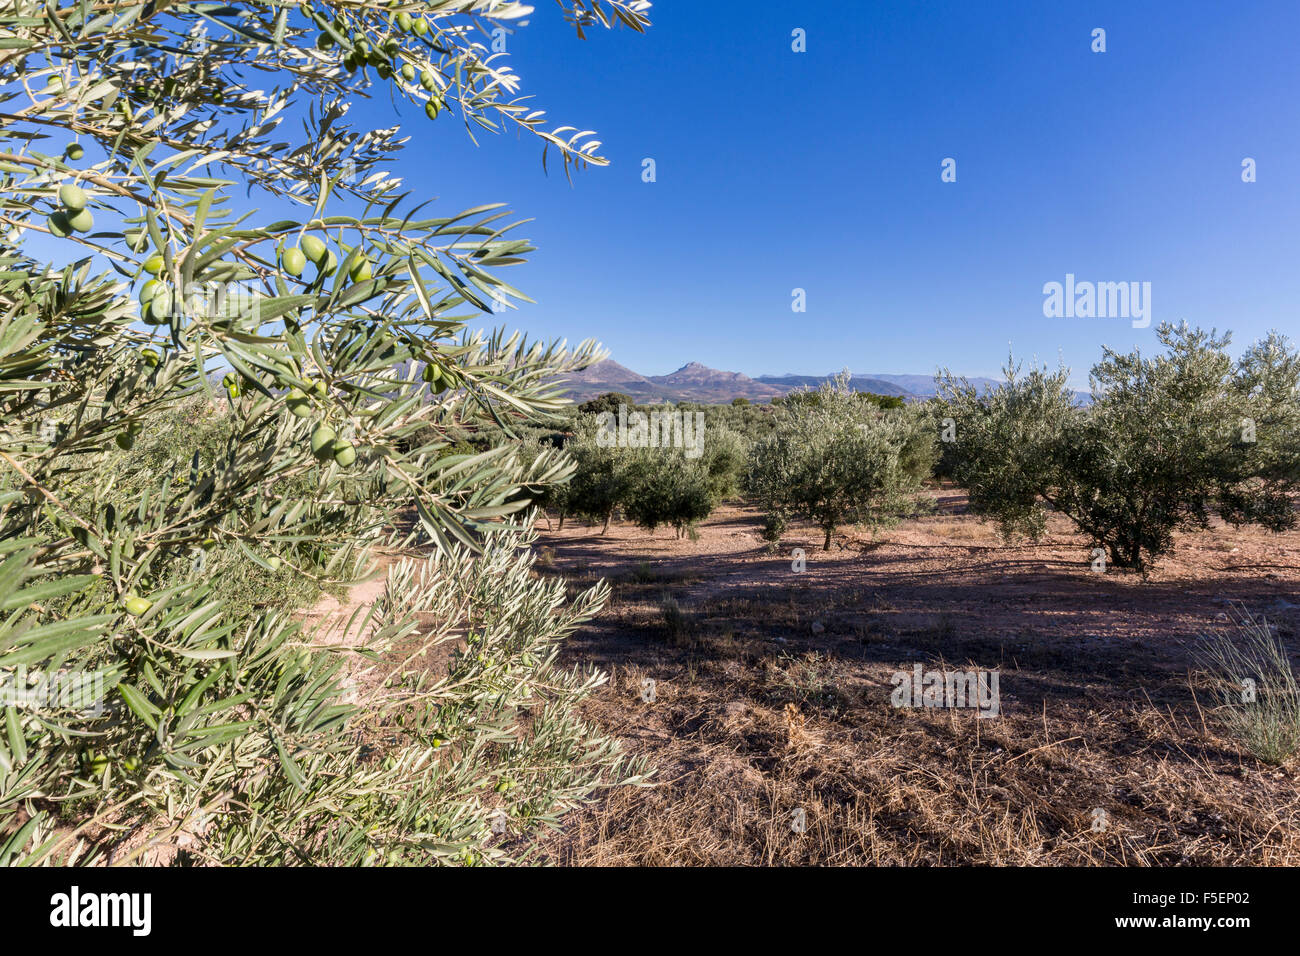 Olive trees in rows reaching to the far distance on hills and mountain sides in Andalucia in Southern Spain Stock Photo